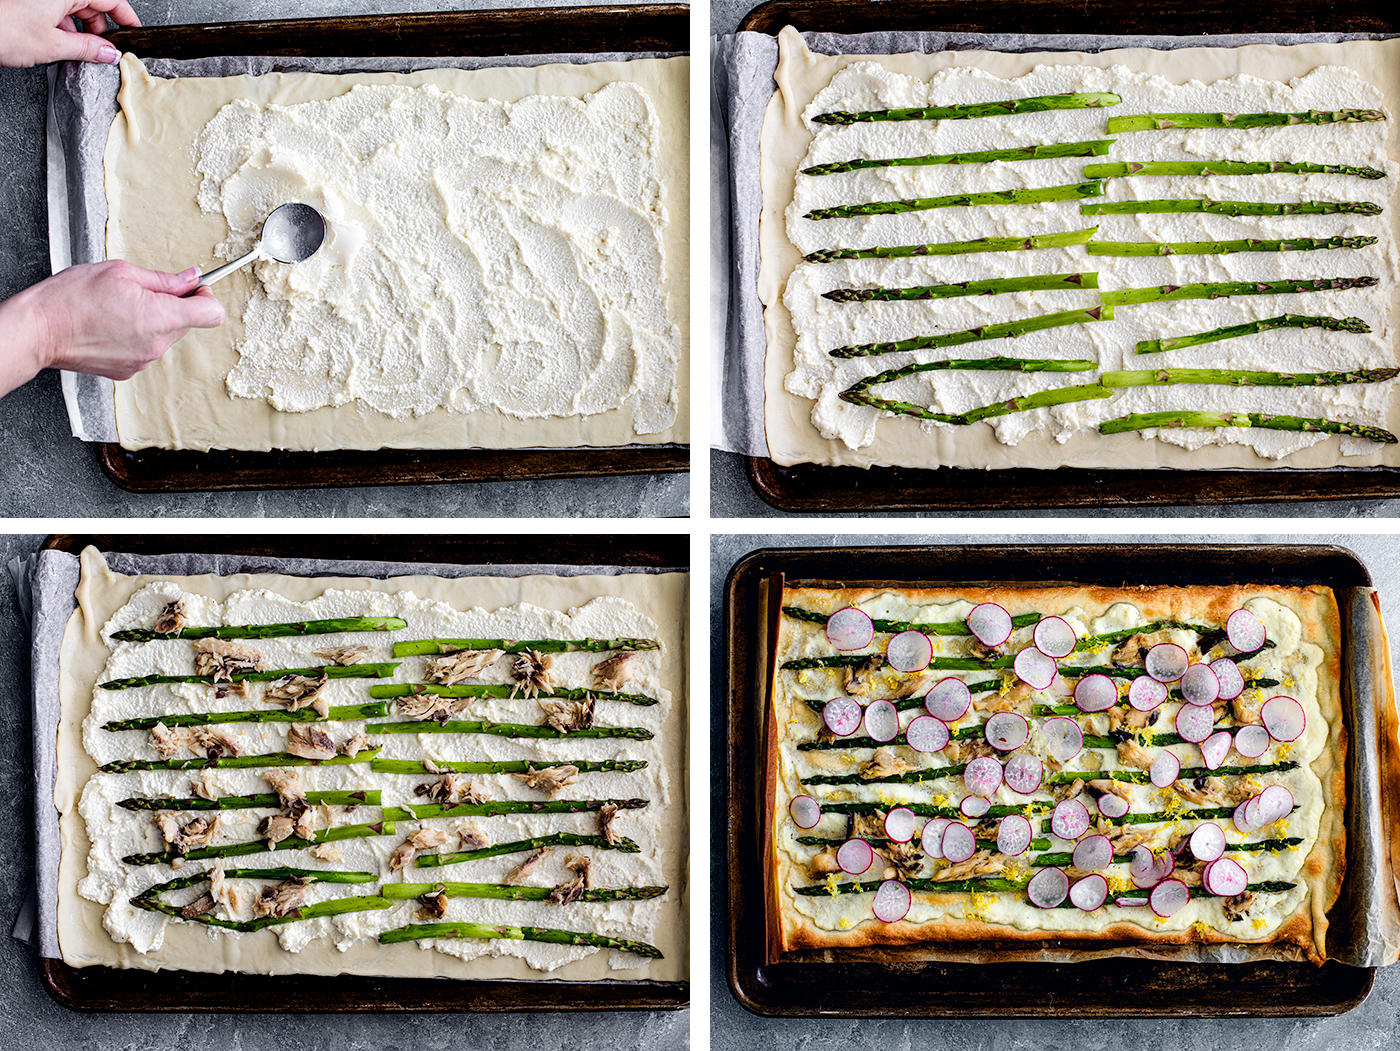 Process shots of flatbread being spread with ricotta and then topped with asparagus and mackerel.